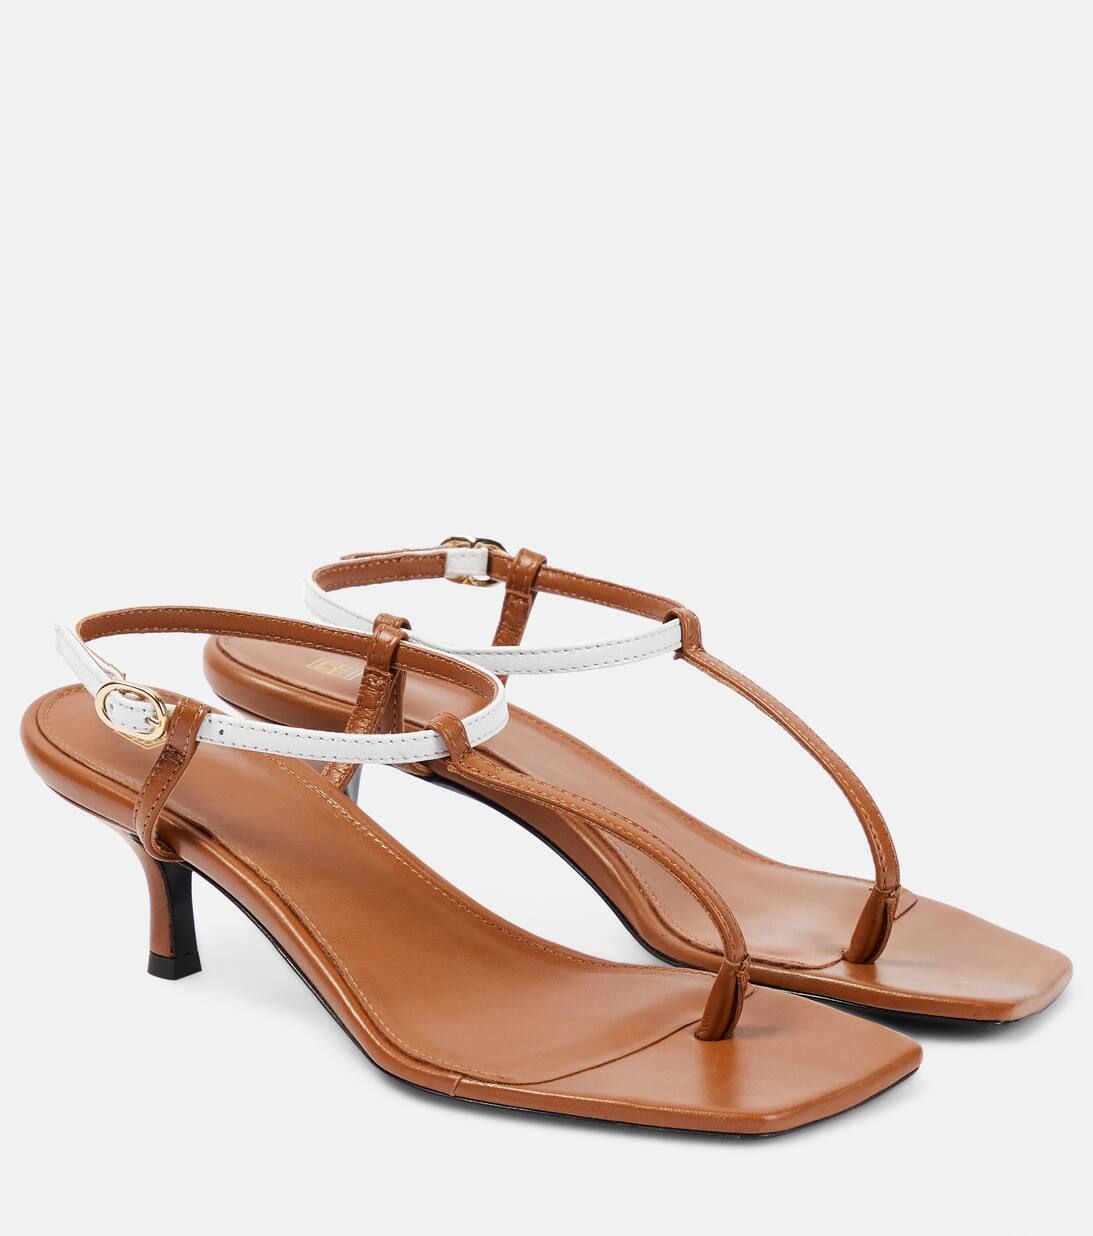 The Bicolor leather thong sandals | Mytheresa (US/CA)